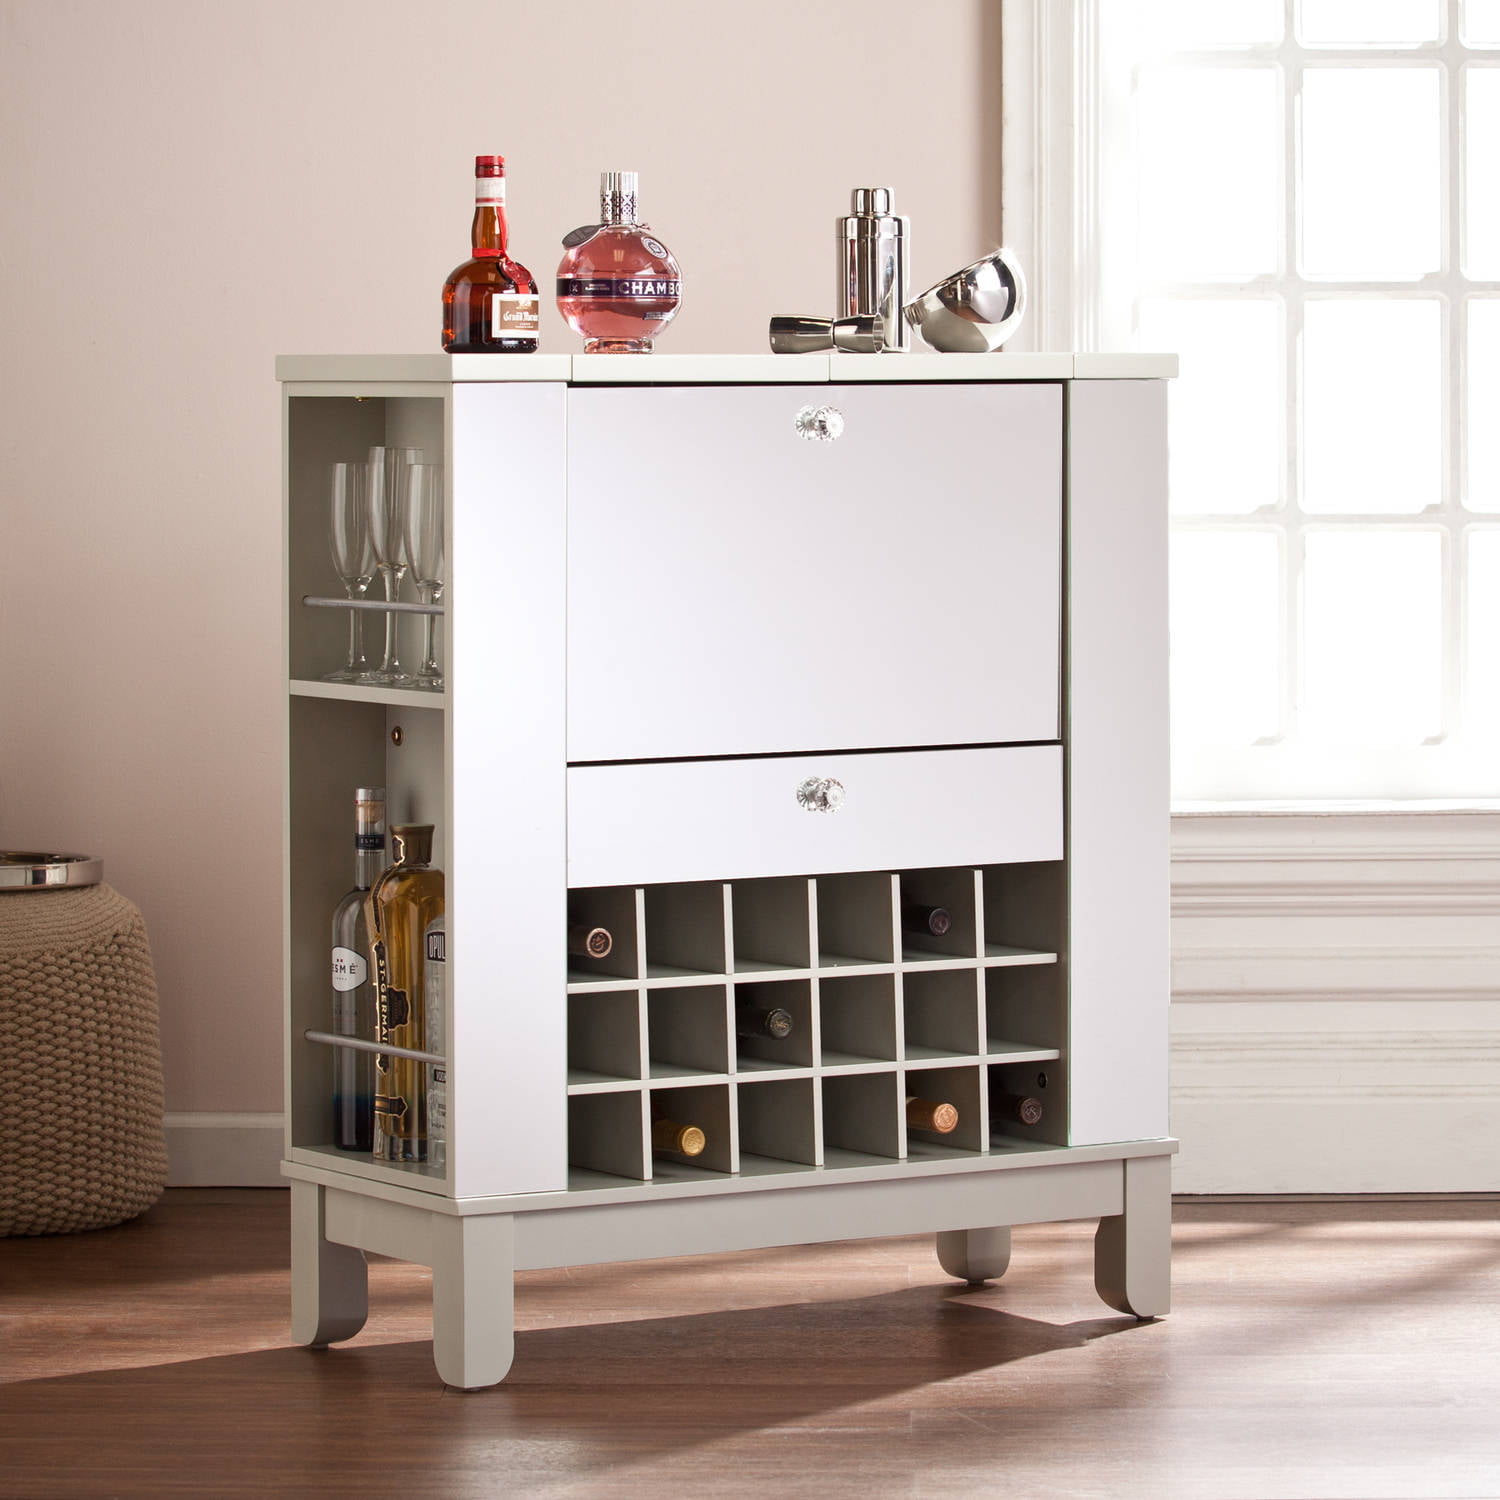 Illusions Mirrored Fold Out Wine Bar, Fold Away Home Bar Cabinet